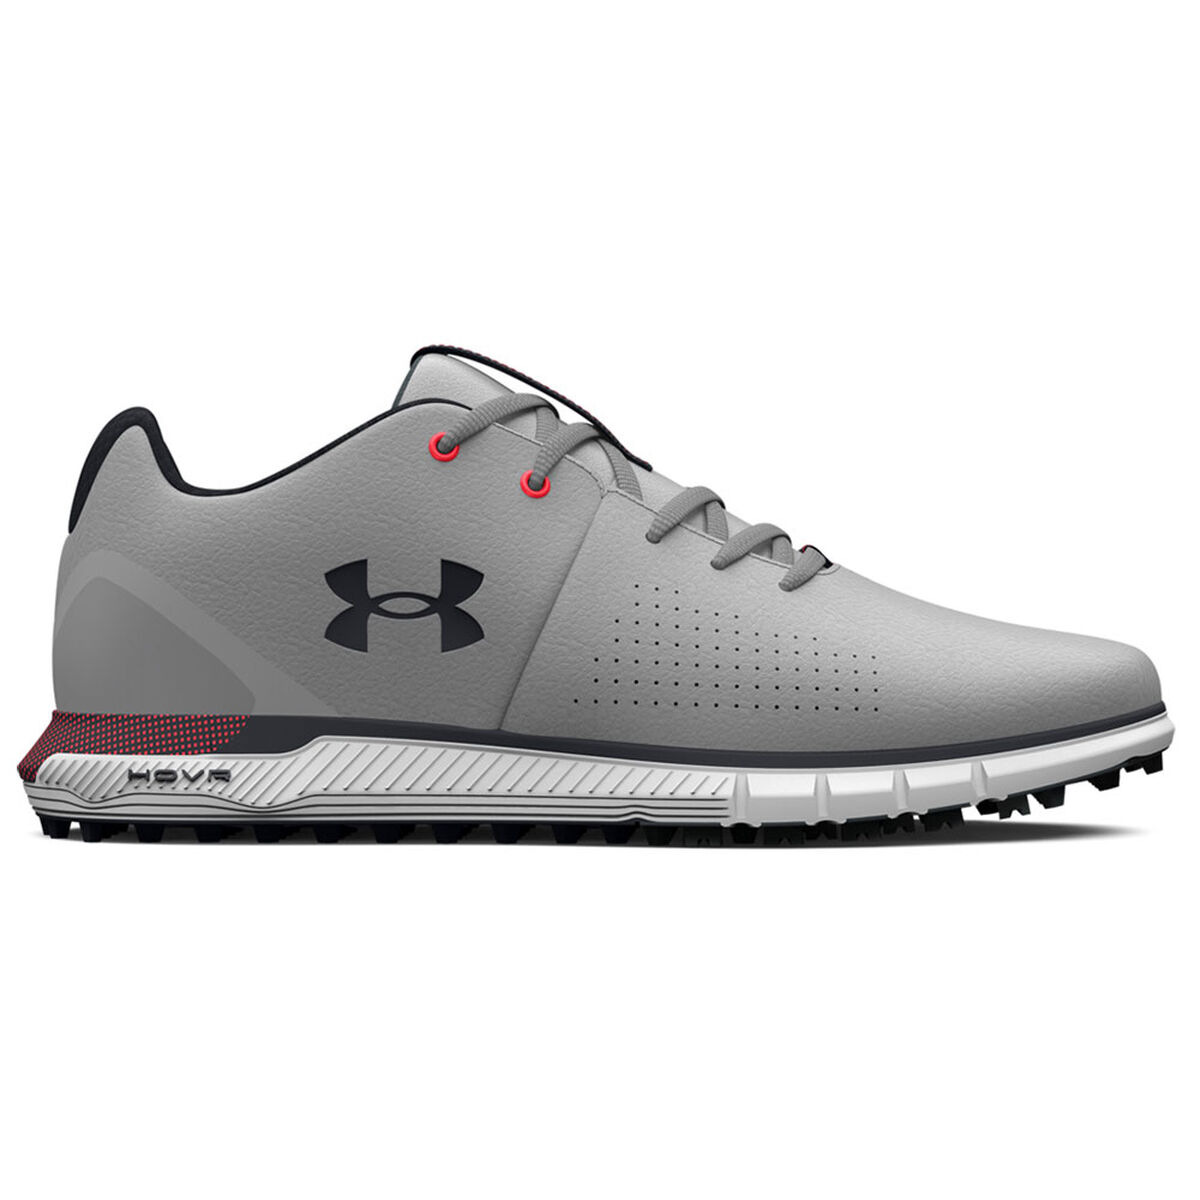 Under Armour Men’s Grey and Black HOVR Fade 2 Spikeless Golf Shoes, Size: 7 | American Golf